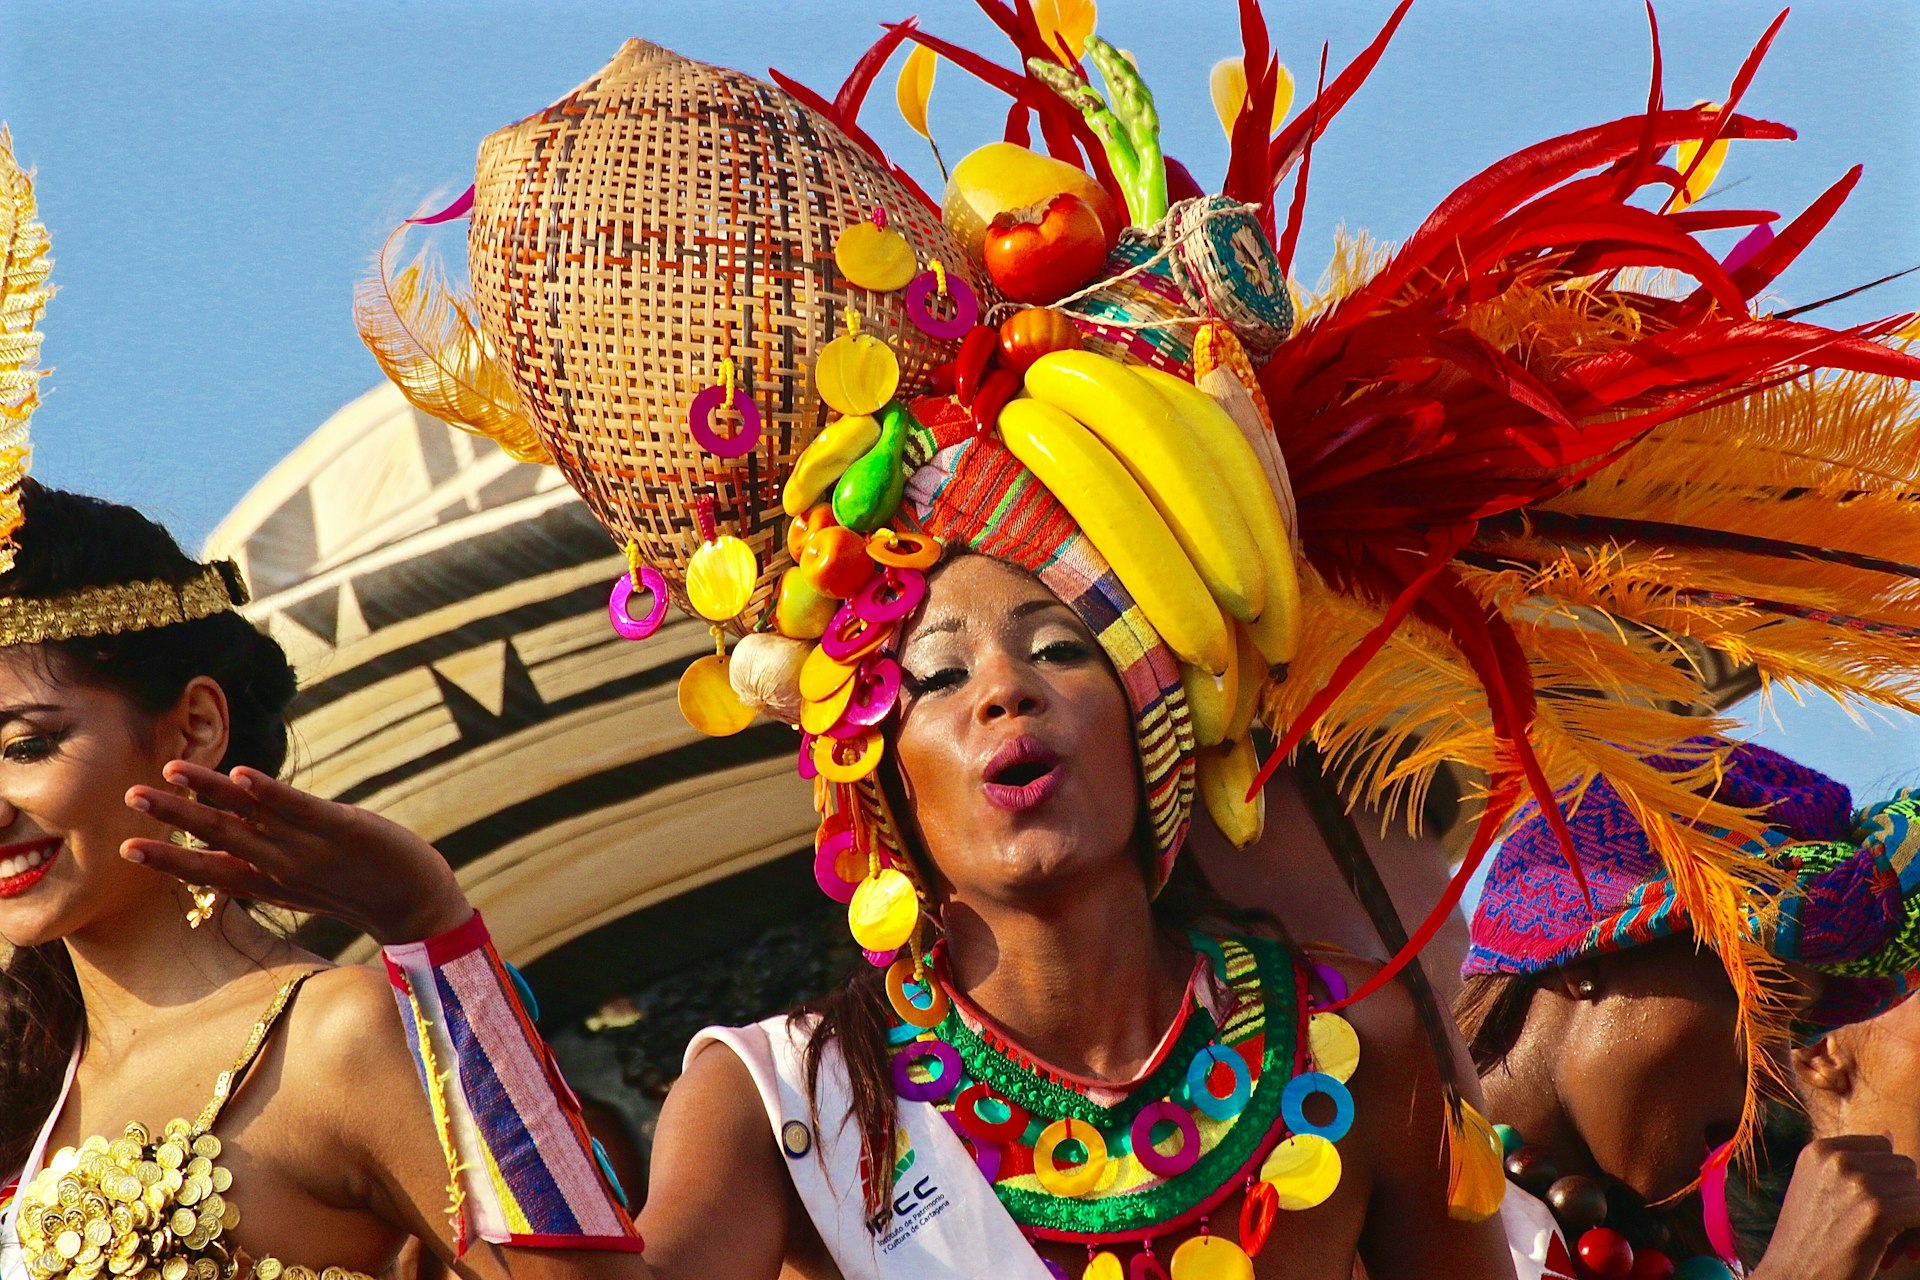 Woman wearing a colorful outfit in Cartagena, Colombia